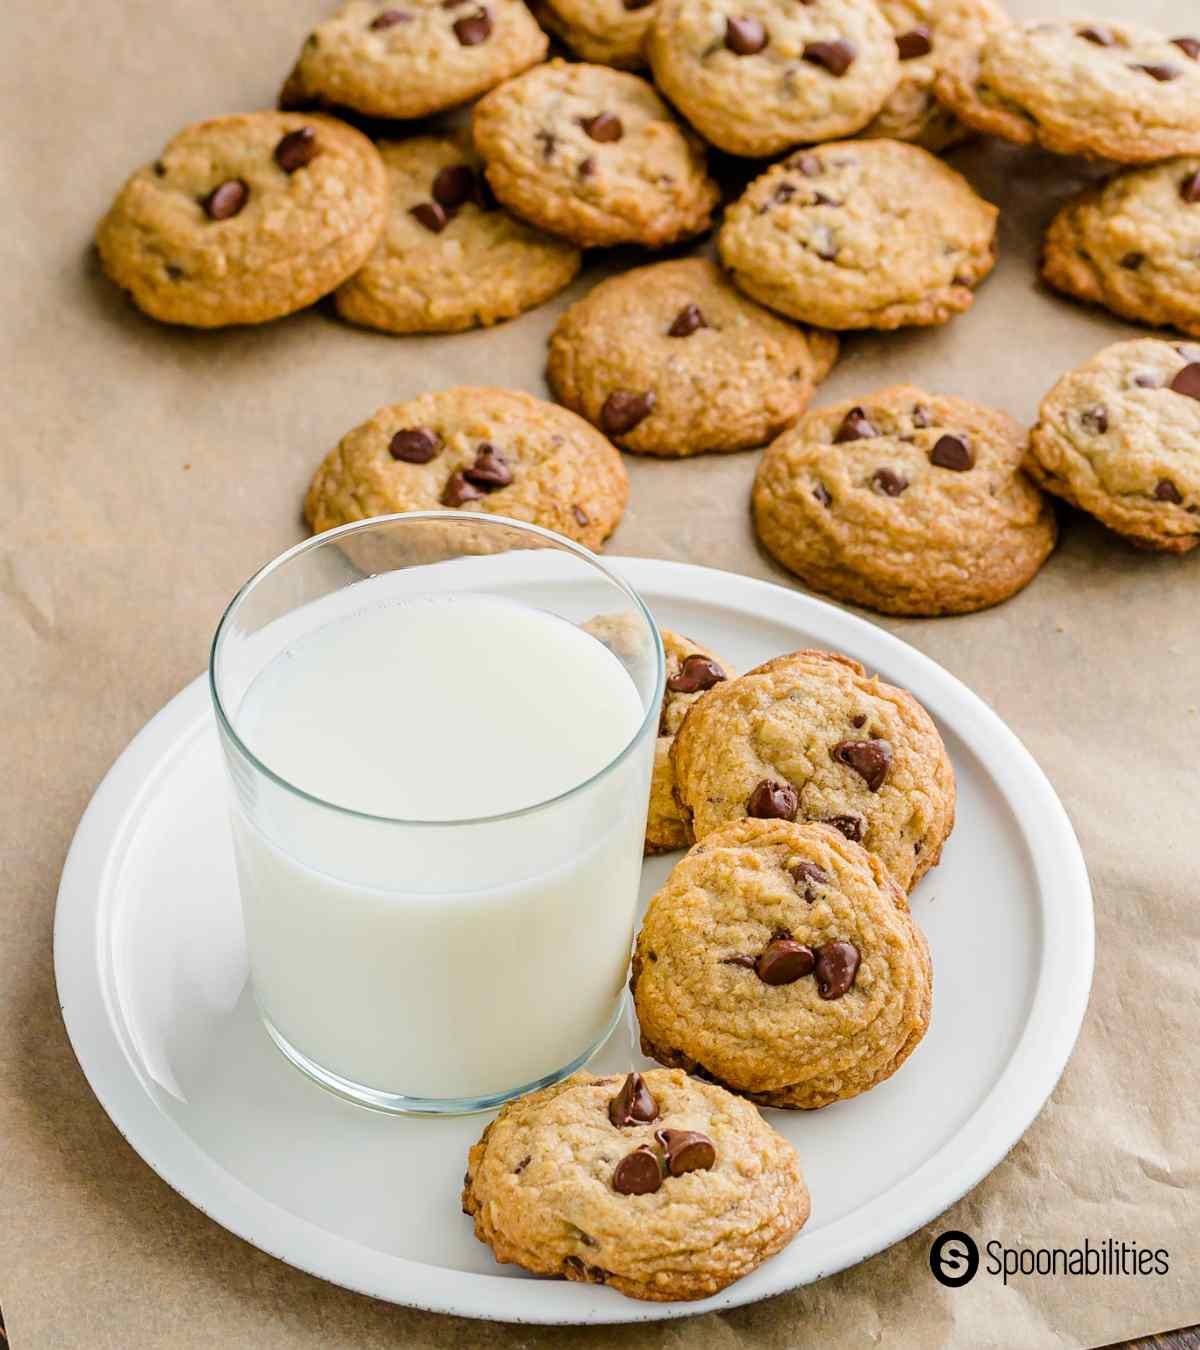 Chocolate chip cookies on a plate with milk and more cookies in the background